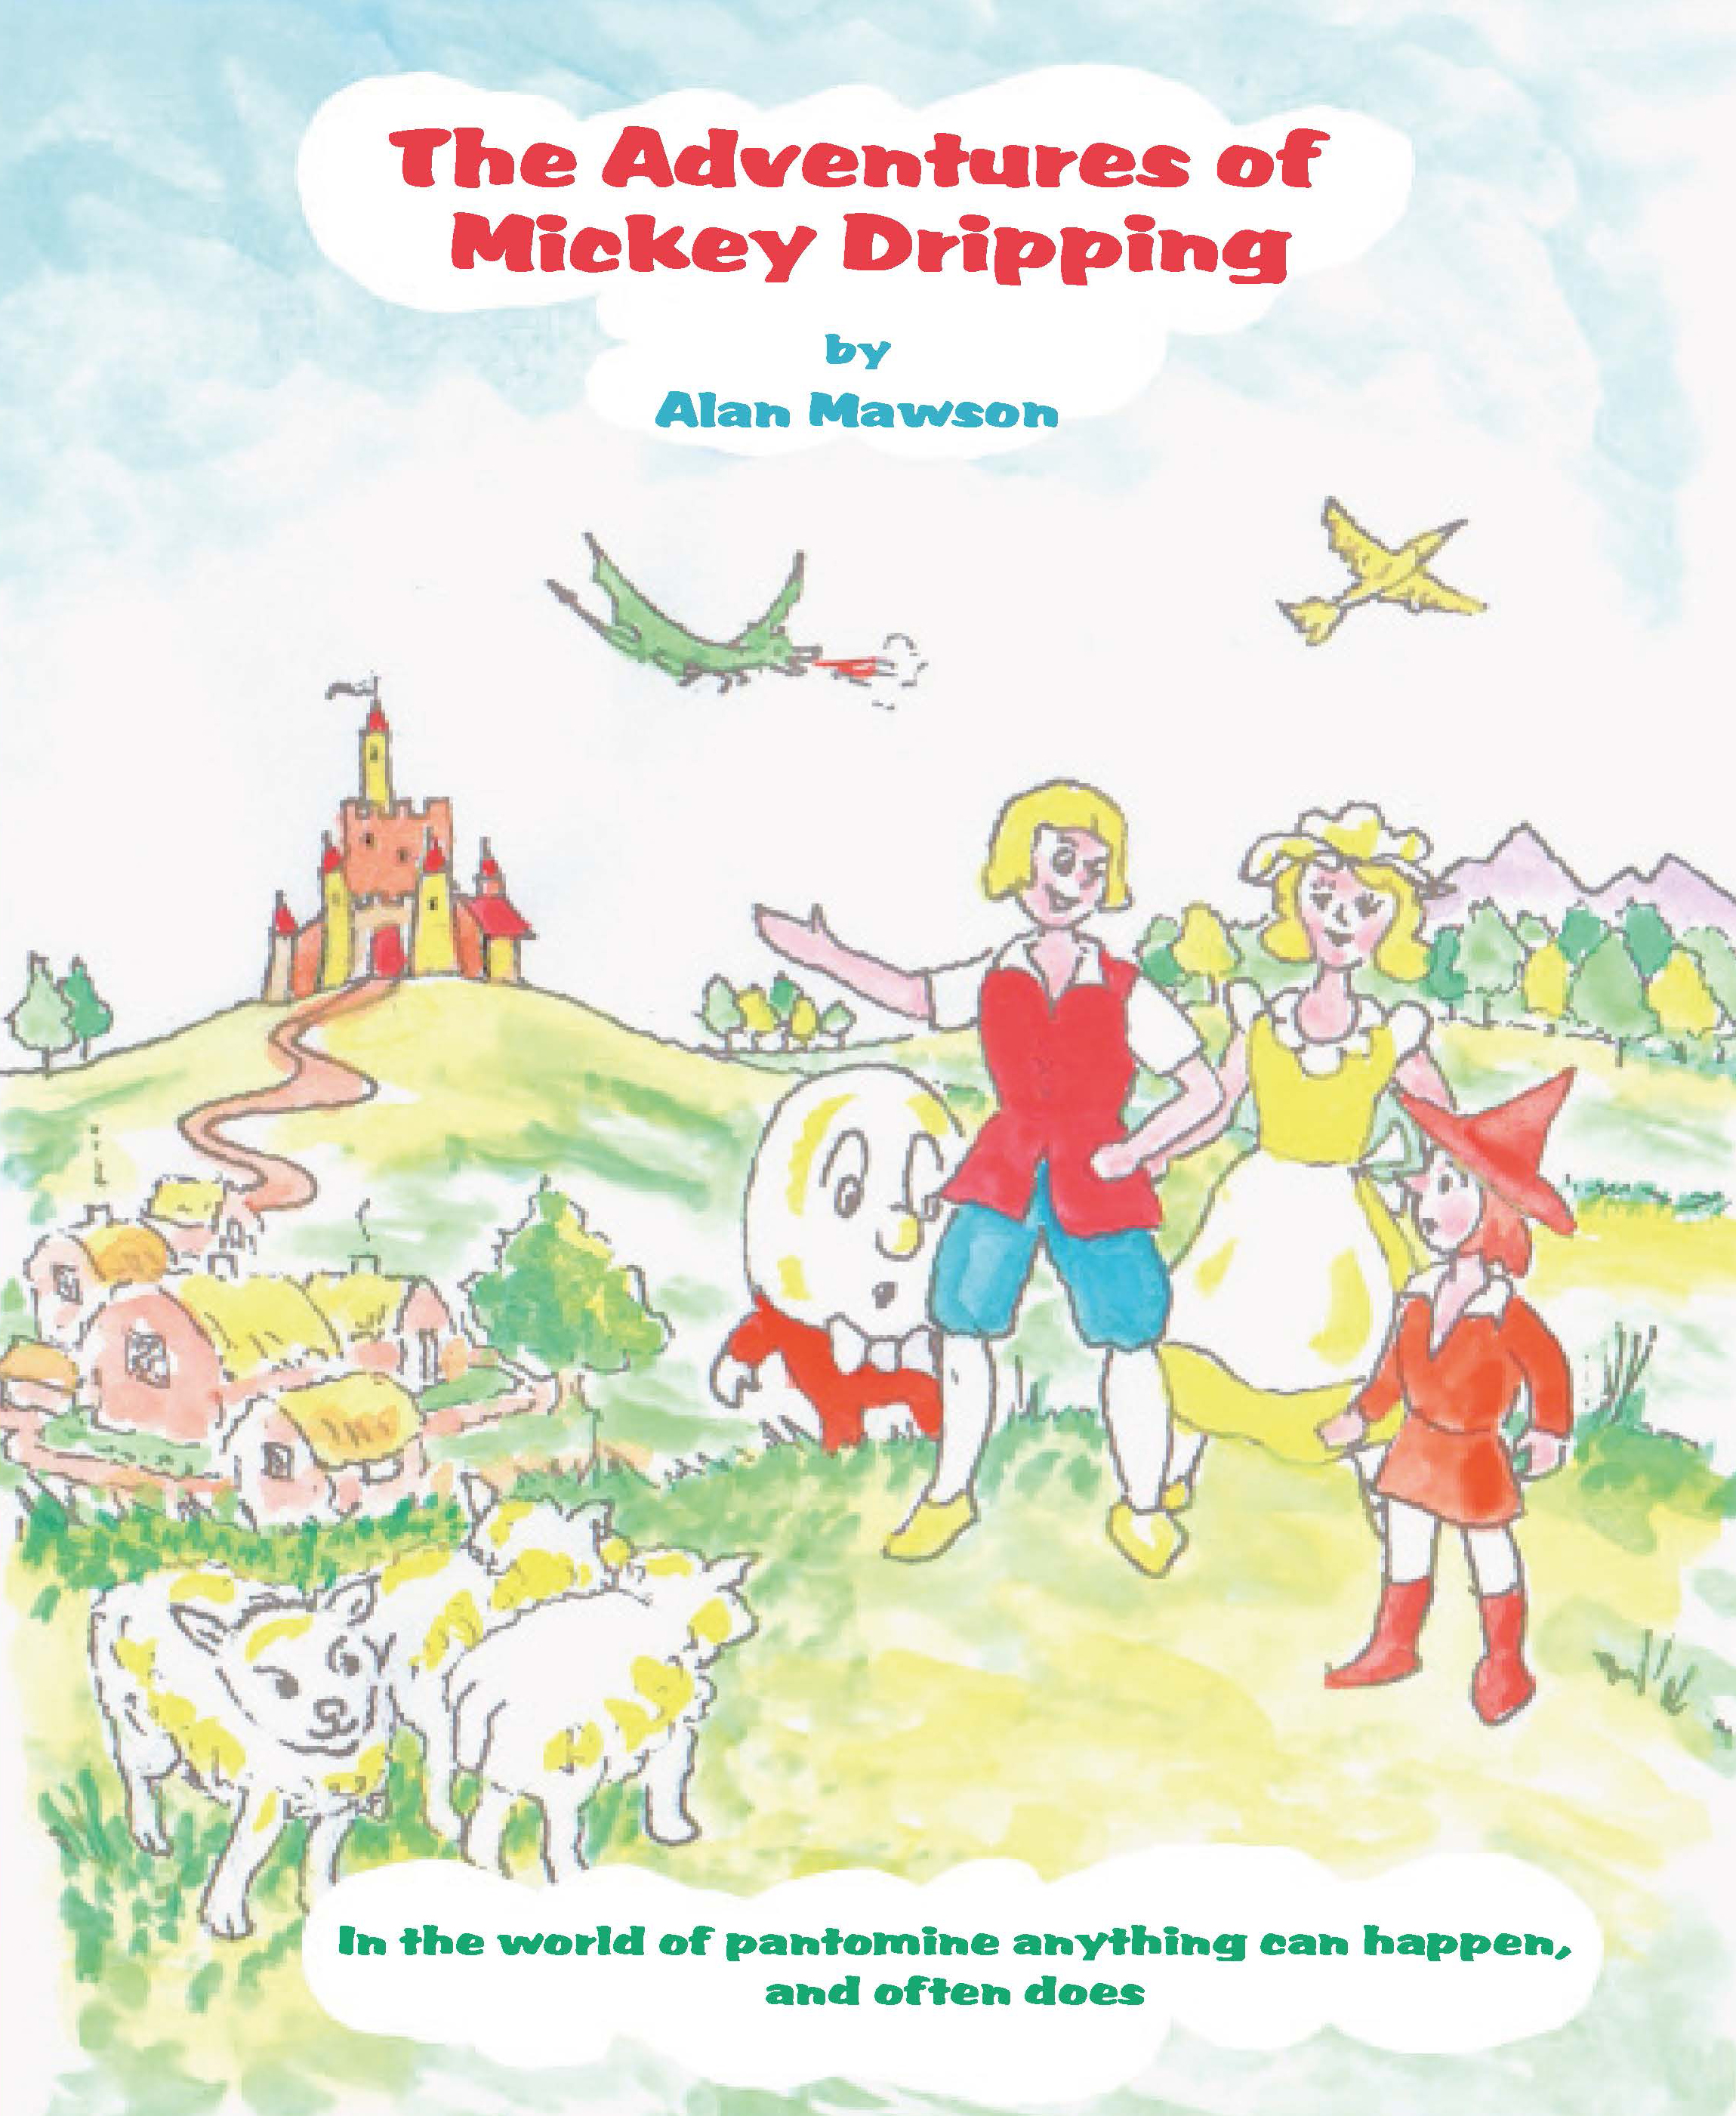 The Adventures of Mickey Drippping